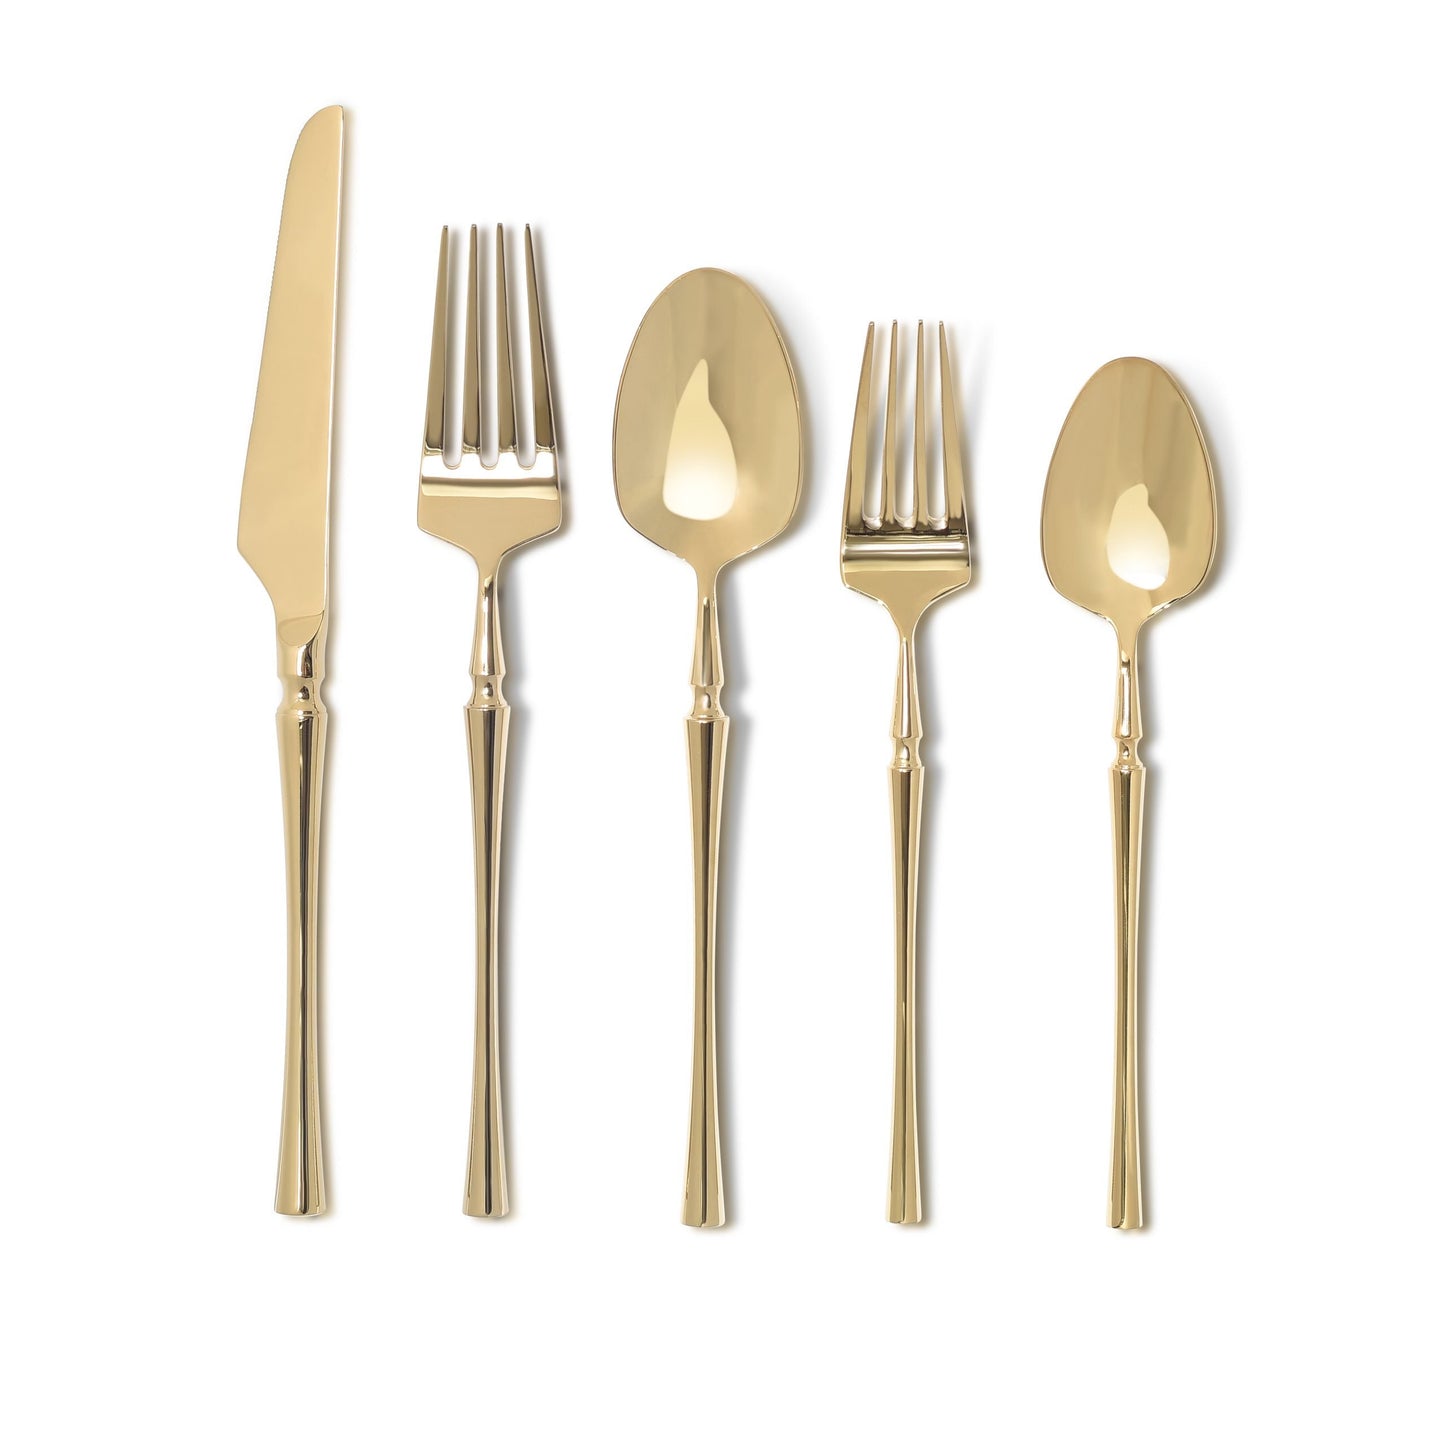 Gold Imperial Silverware, service for 4